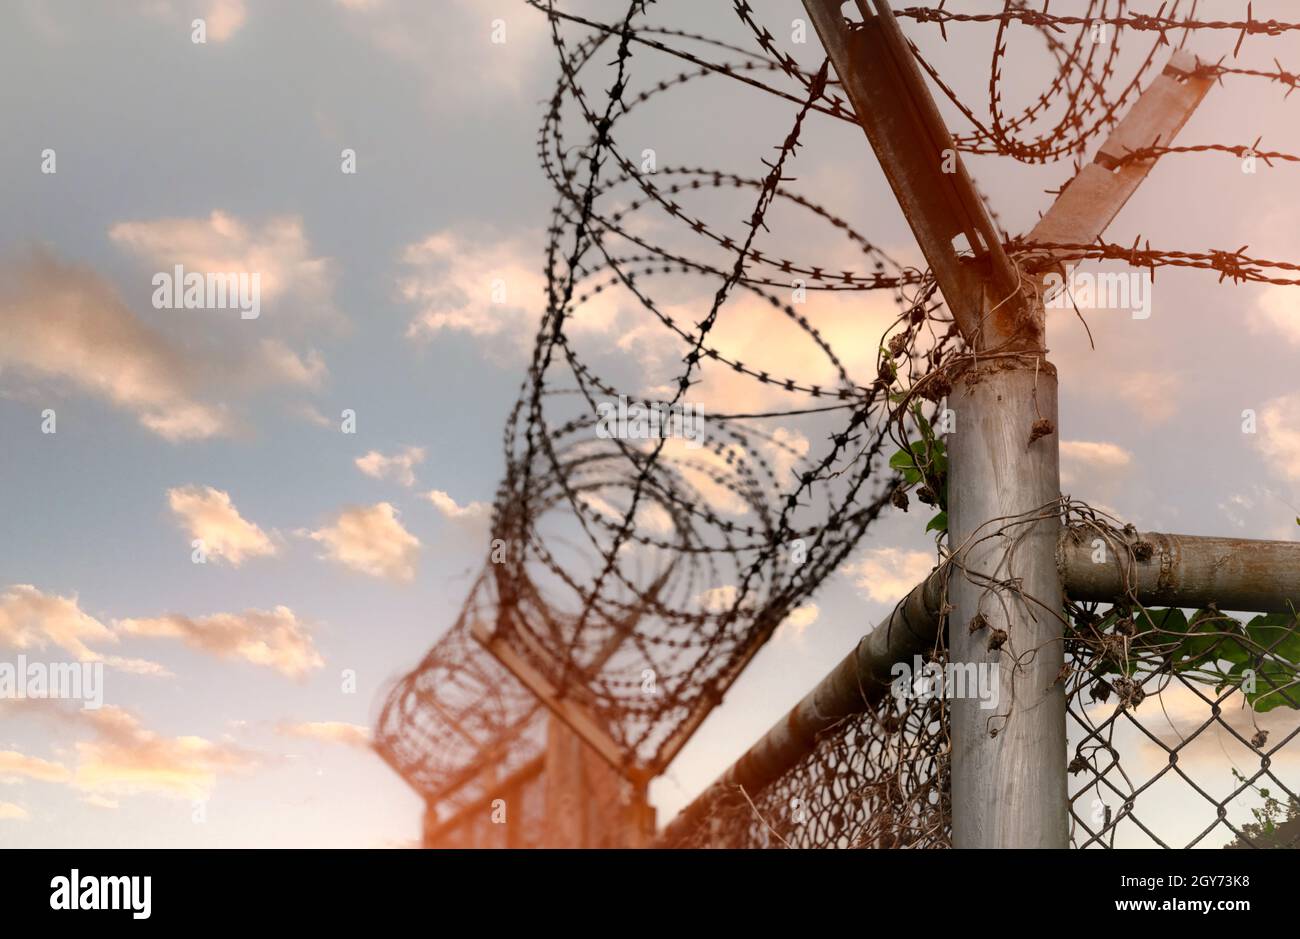 Prison security fence. Barbed wire security fence. Razor wire jail fence. Barrier border. Boundary security wall. Prison for arrest criminals or terro Stock Photo